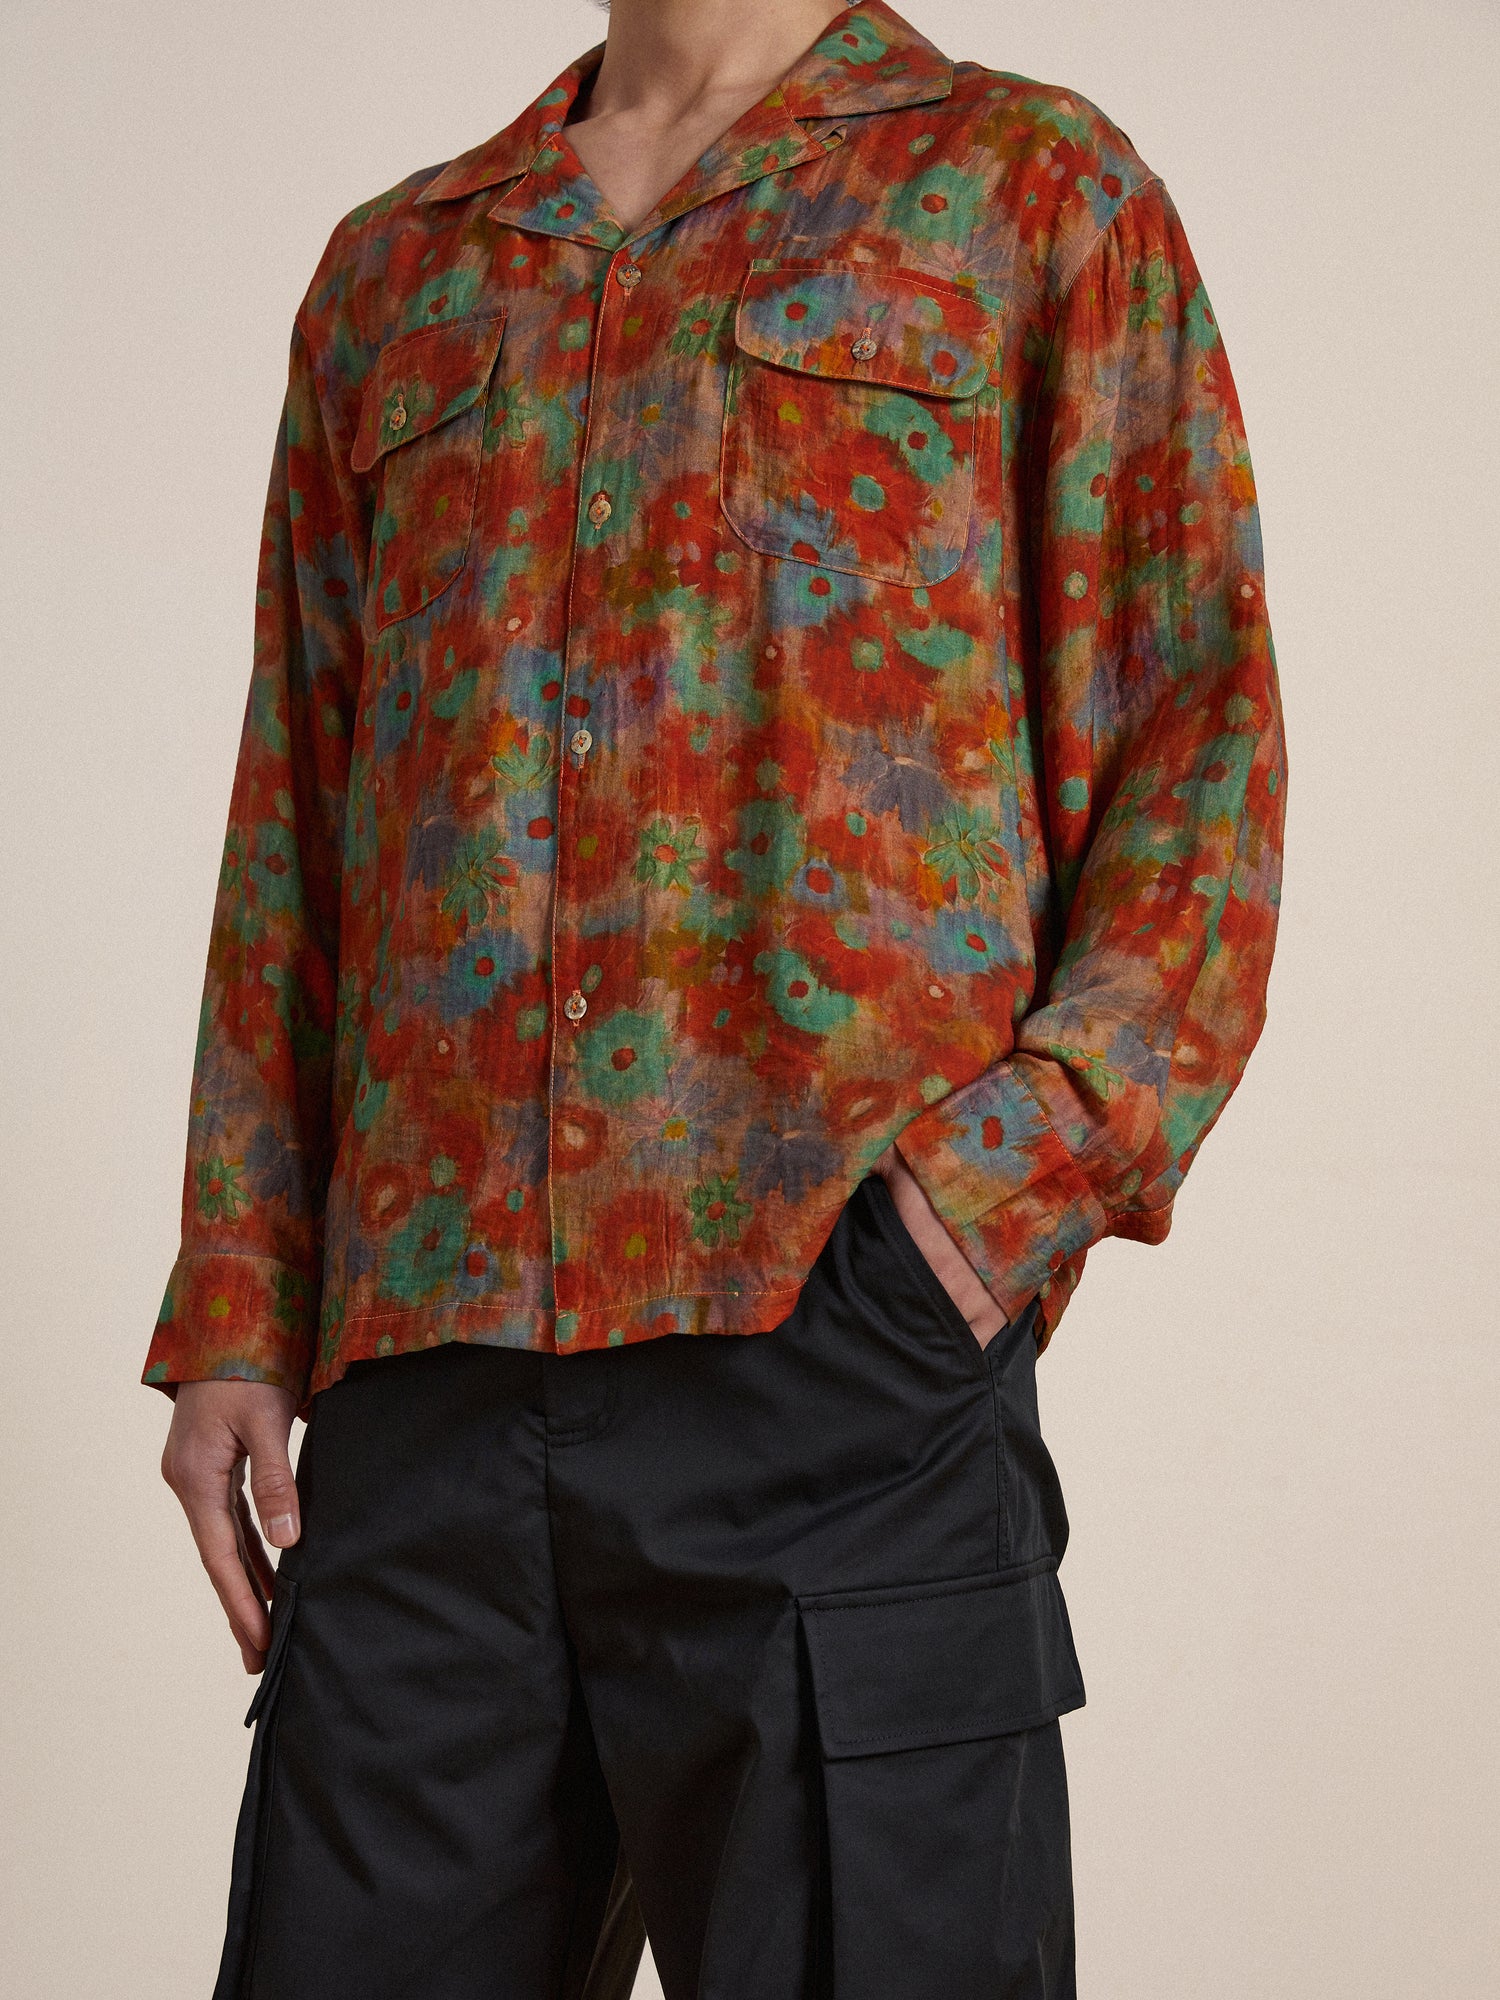 A man wearing a Found Waterblend LS Camp Shirt with a colorful print.